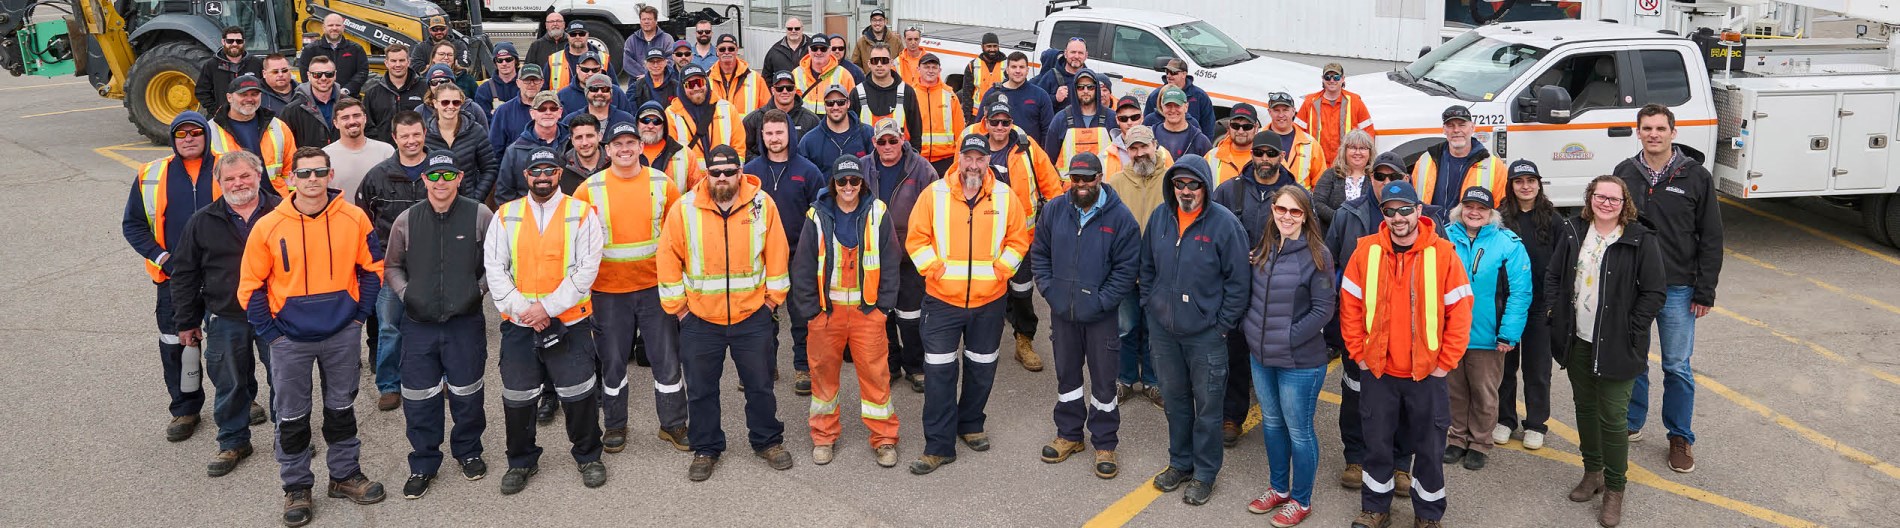 City of Brantford Operations Services team